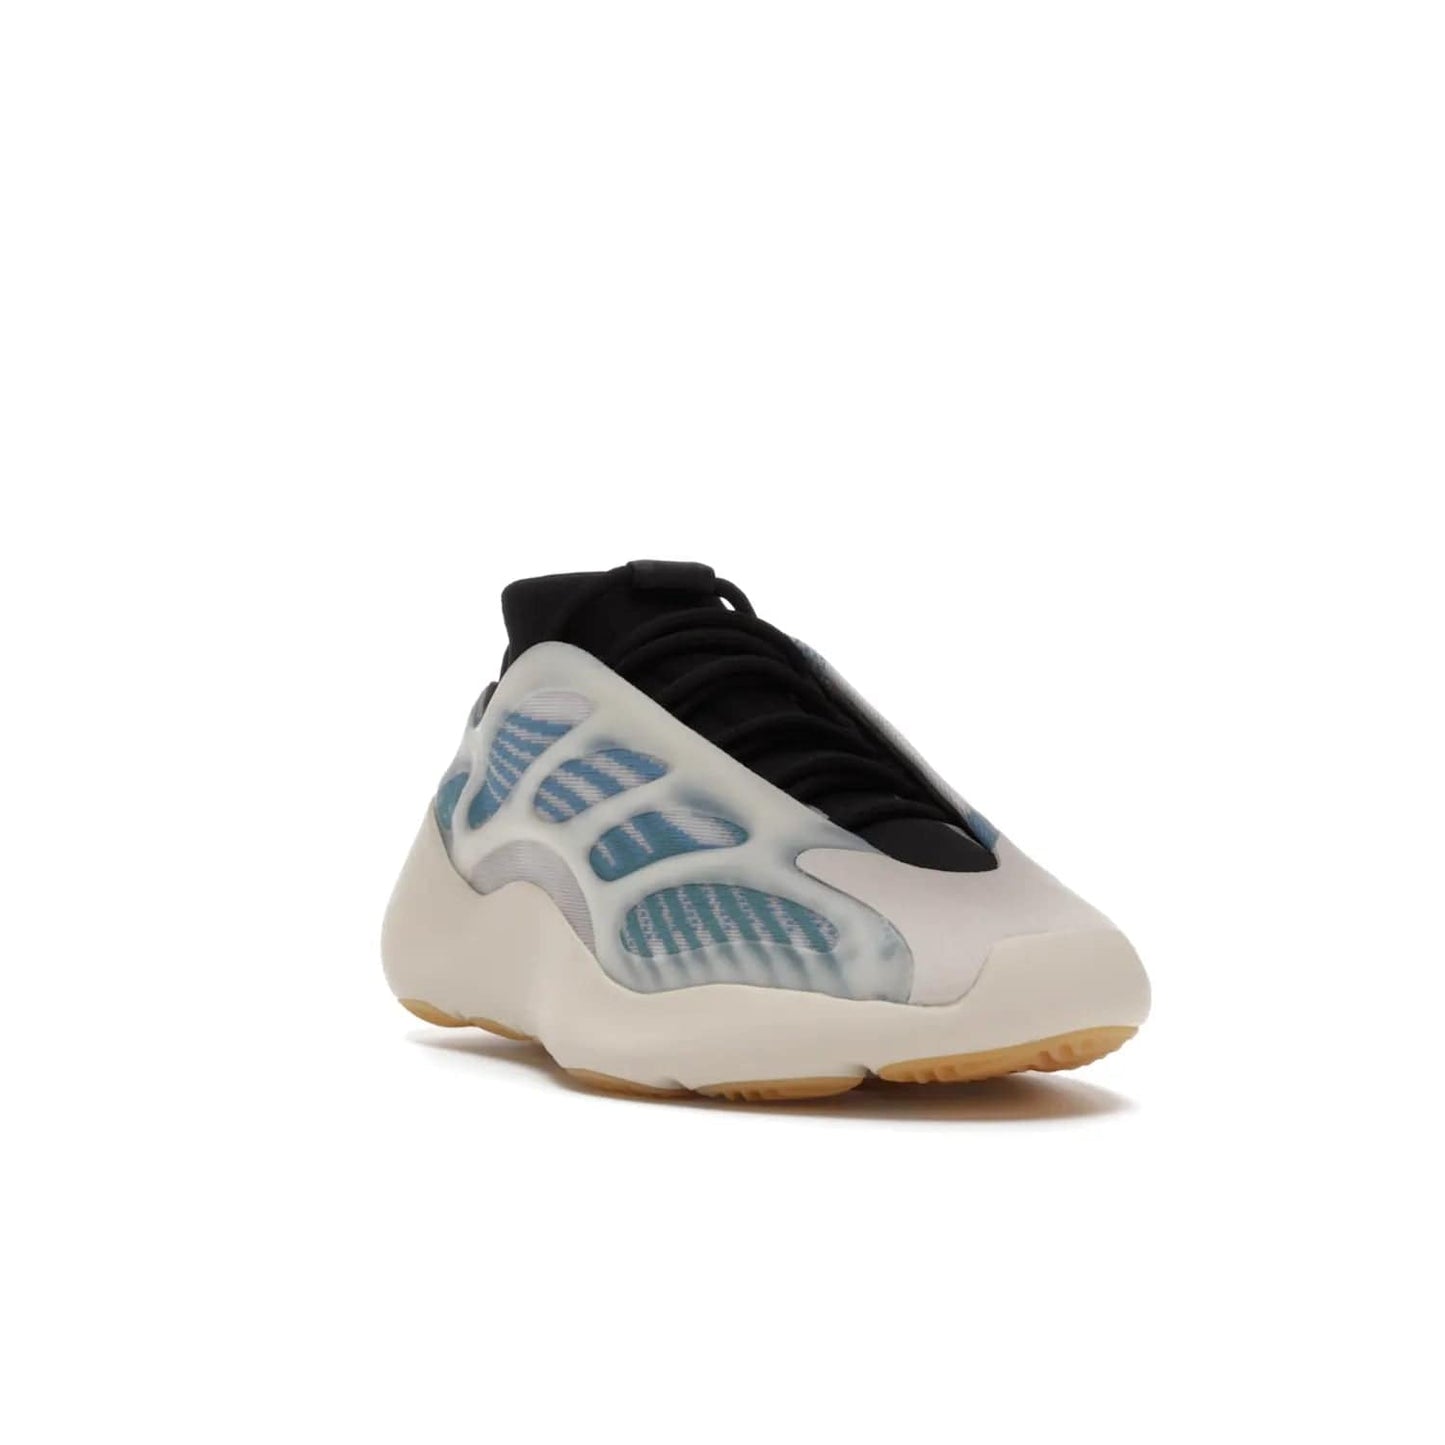 adidas Yeezy 700 V3 Kyanite - Image 7 - Only at www.BallersClubKickz.com - The adidas Yeezy 700 V3 Kyanite offers a layered design featuring a glow-in-the-dark TPU cage and a tonal cream-colored EVA foam midsole. With its herringbone-patterned outsole, the style and comfort of the sneaker will accompany you anywhere. Released in March 2021, it's a great addition to any sneaker wardrobe.